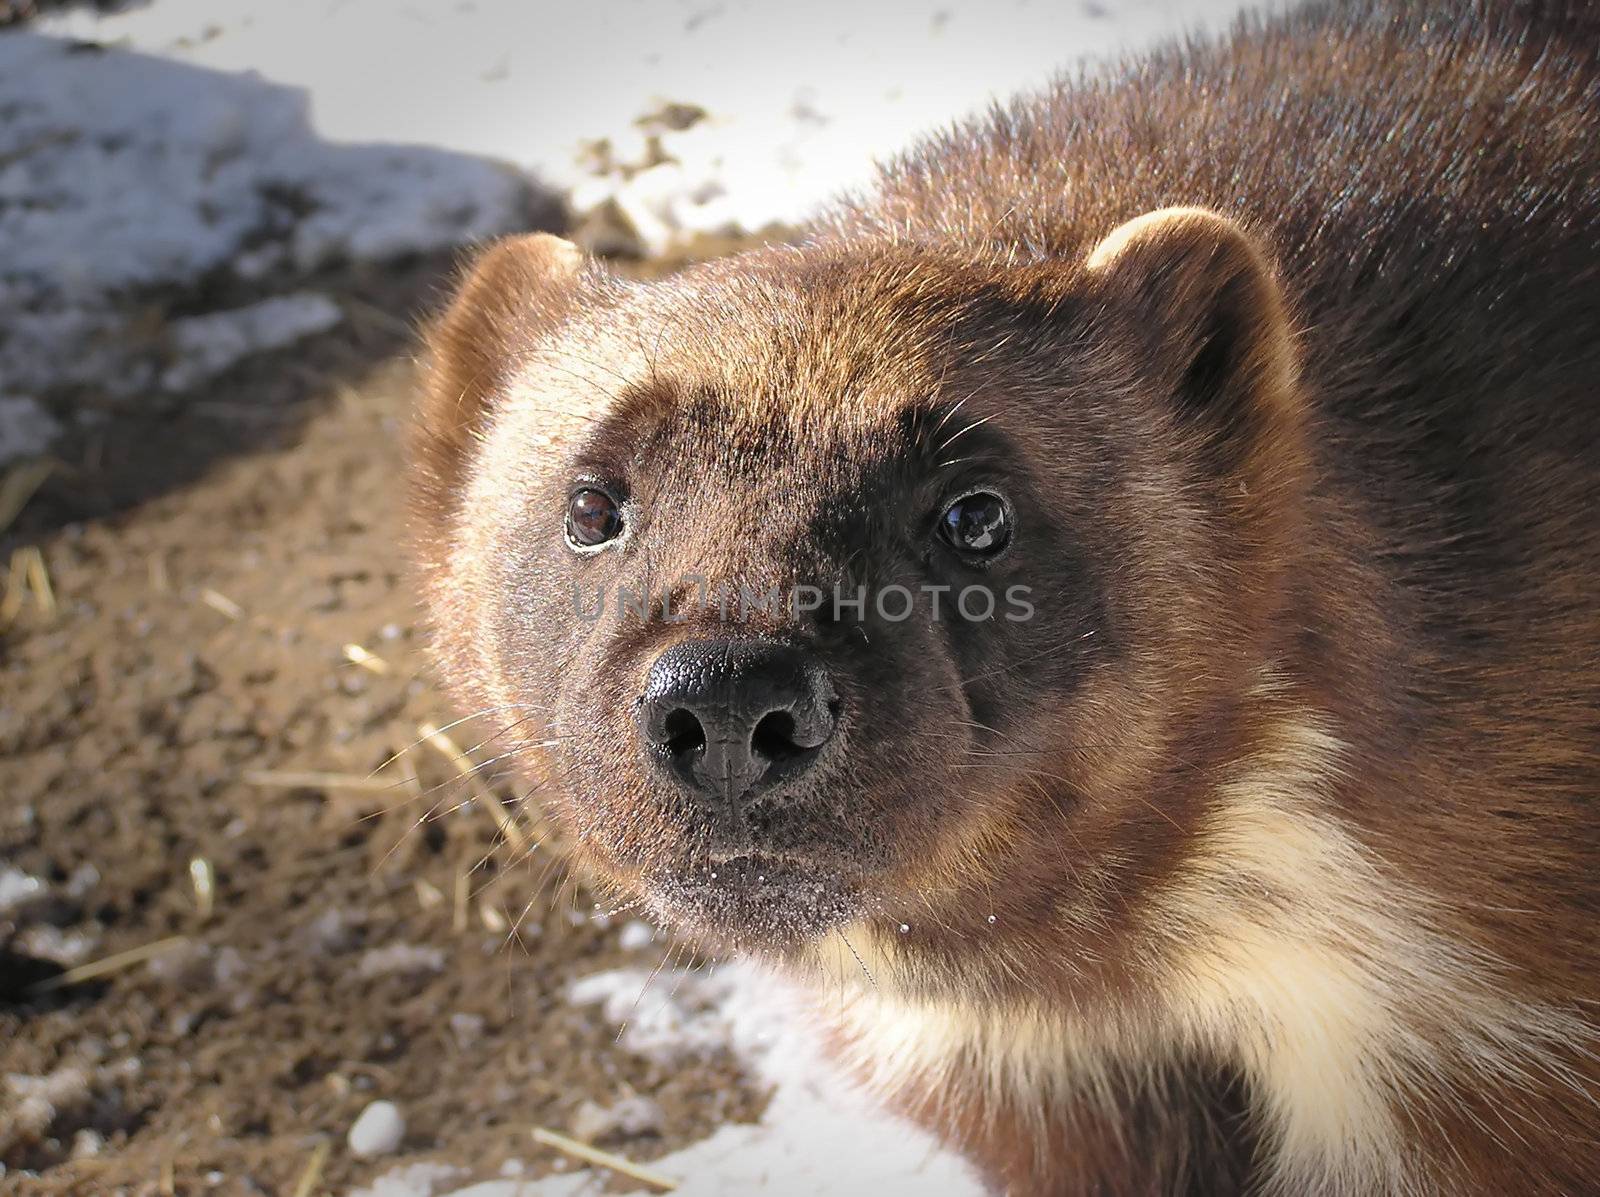 Close-up of a wolverine looking at camera white out in the sun on a winter day, great details of the oily fur reflecting light and water dropplets in the whiskers.